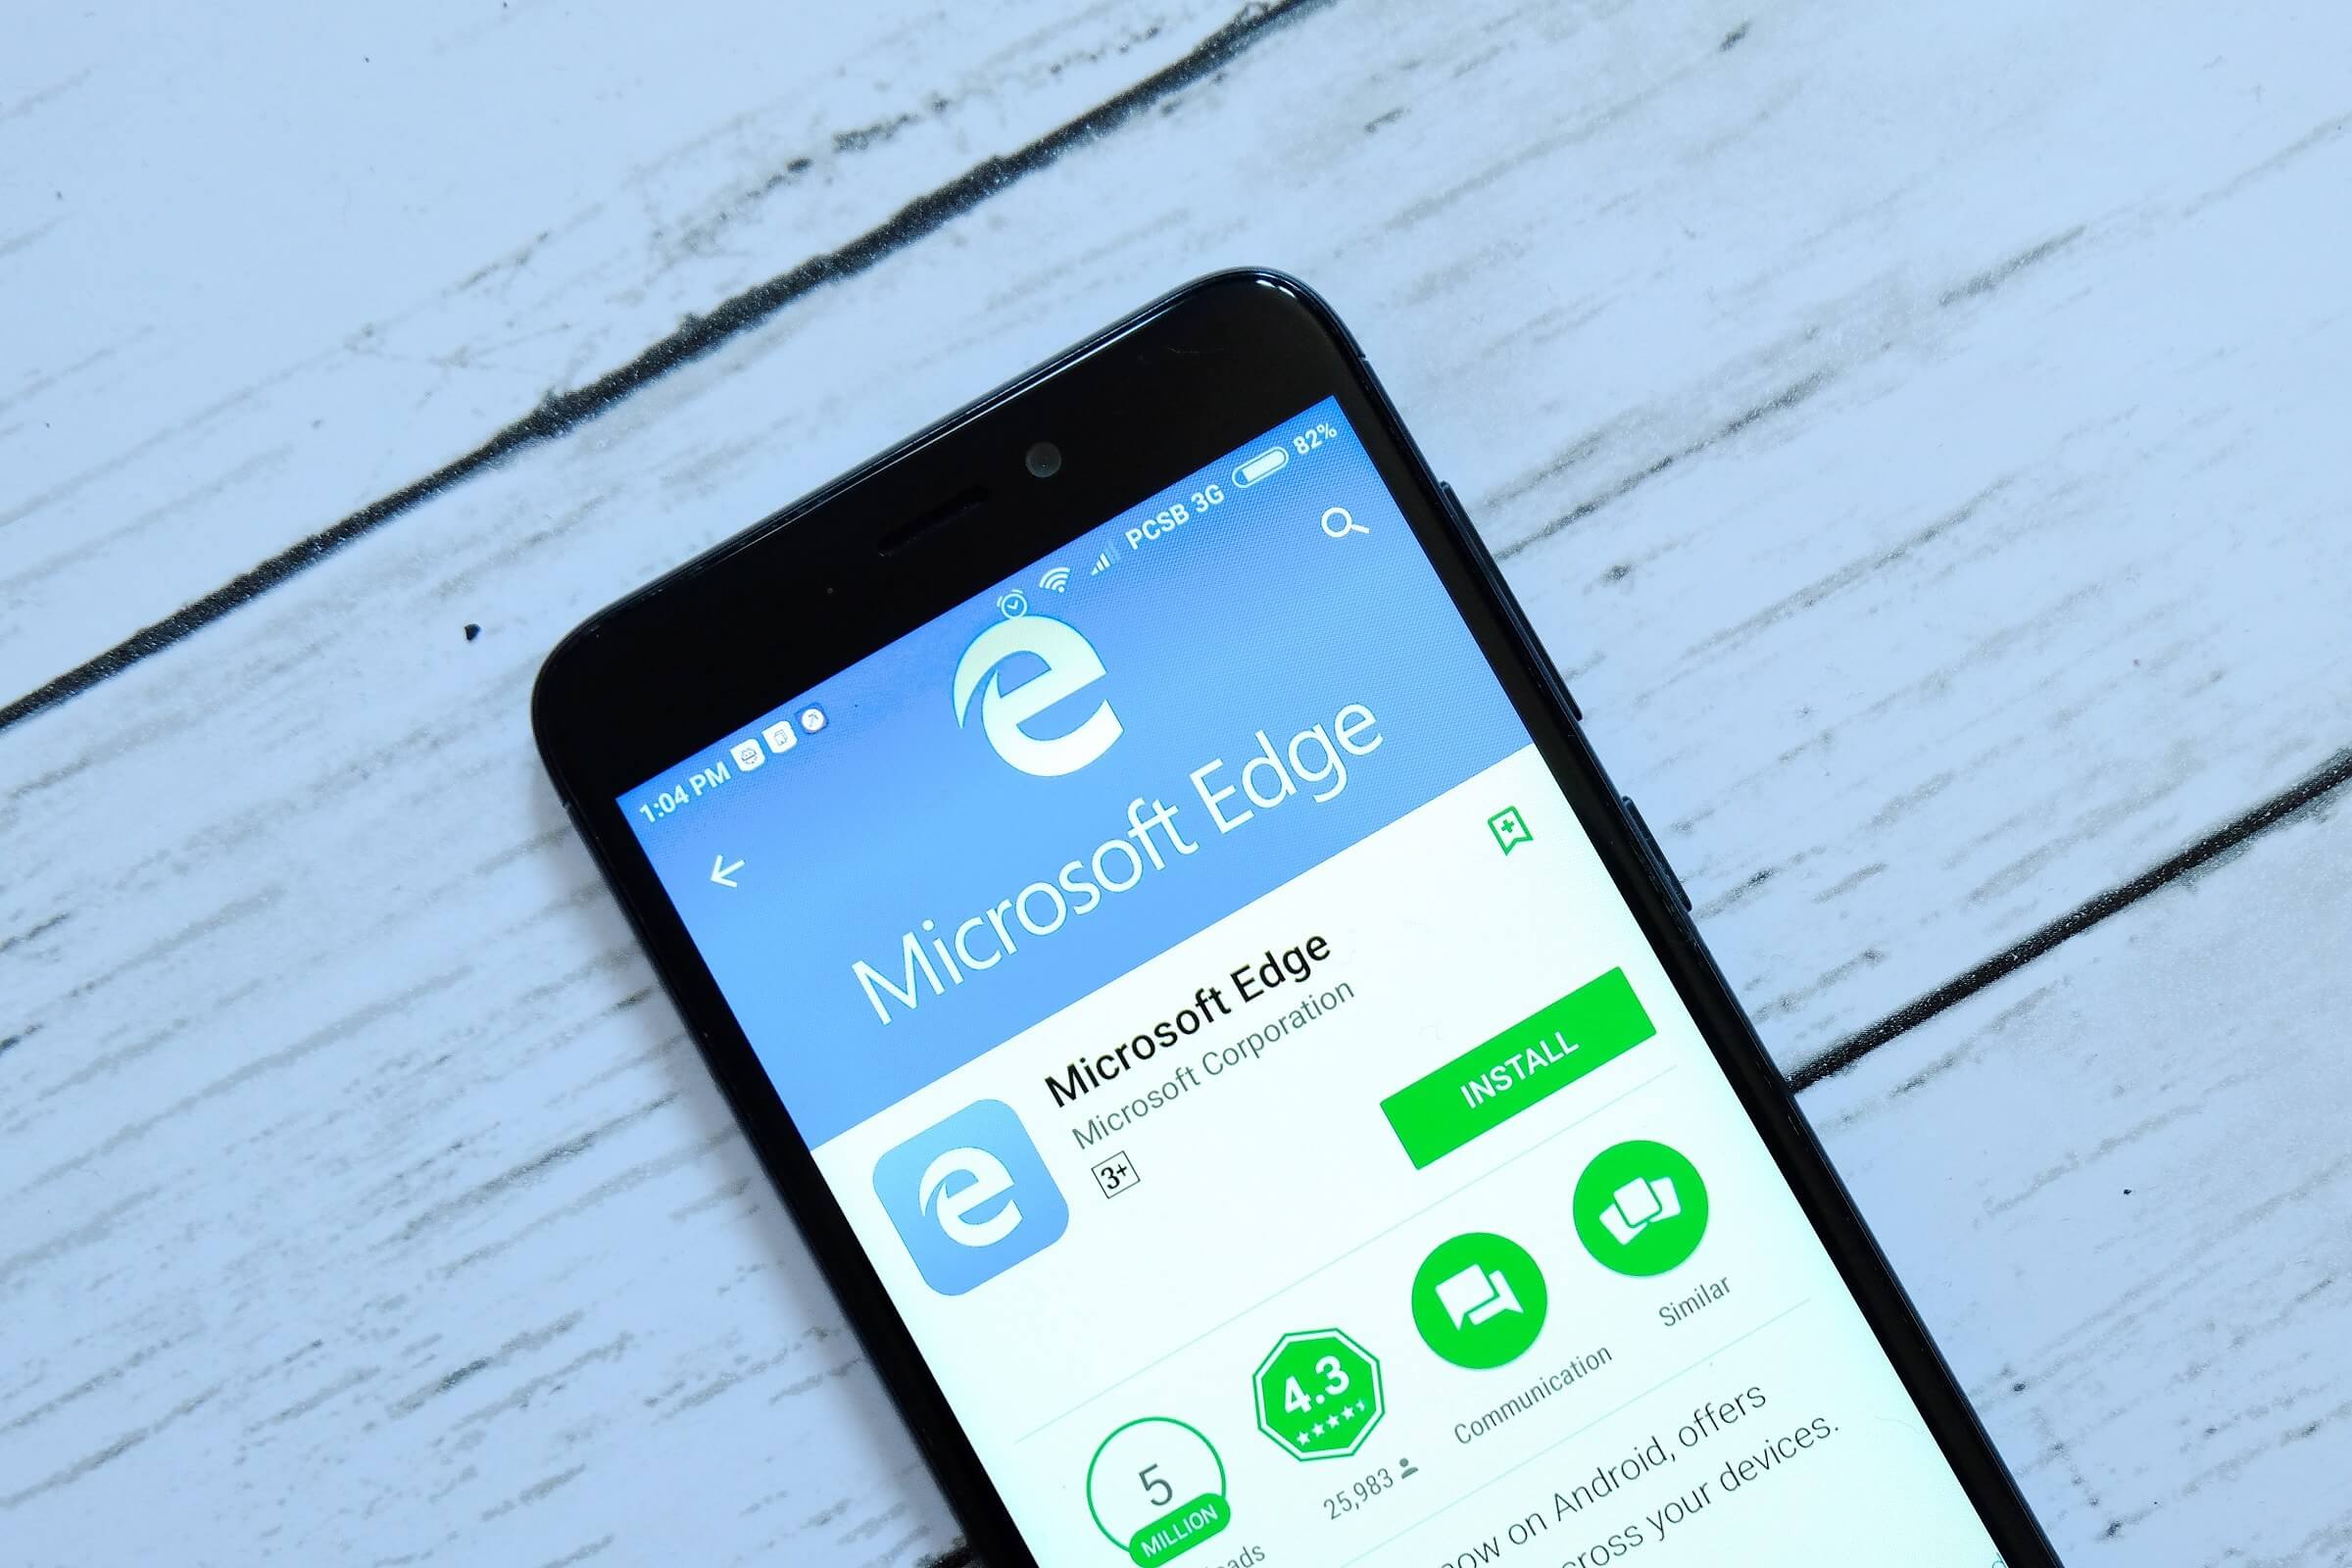 Microsoft's mobile Edge browser will warn users about fake news